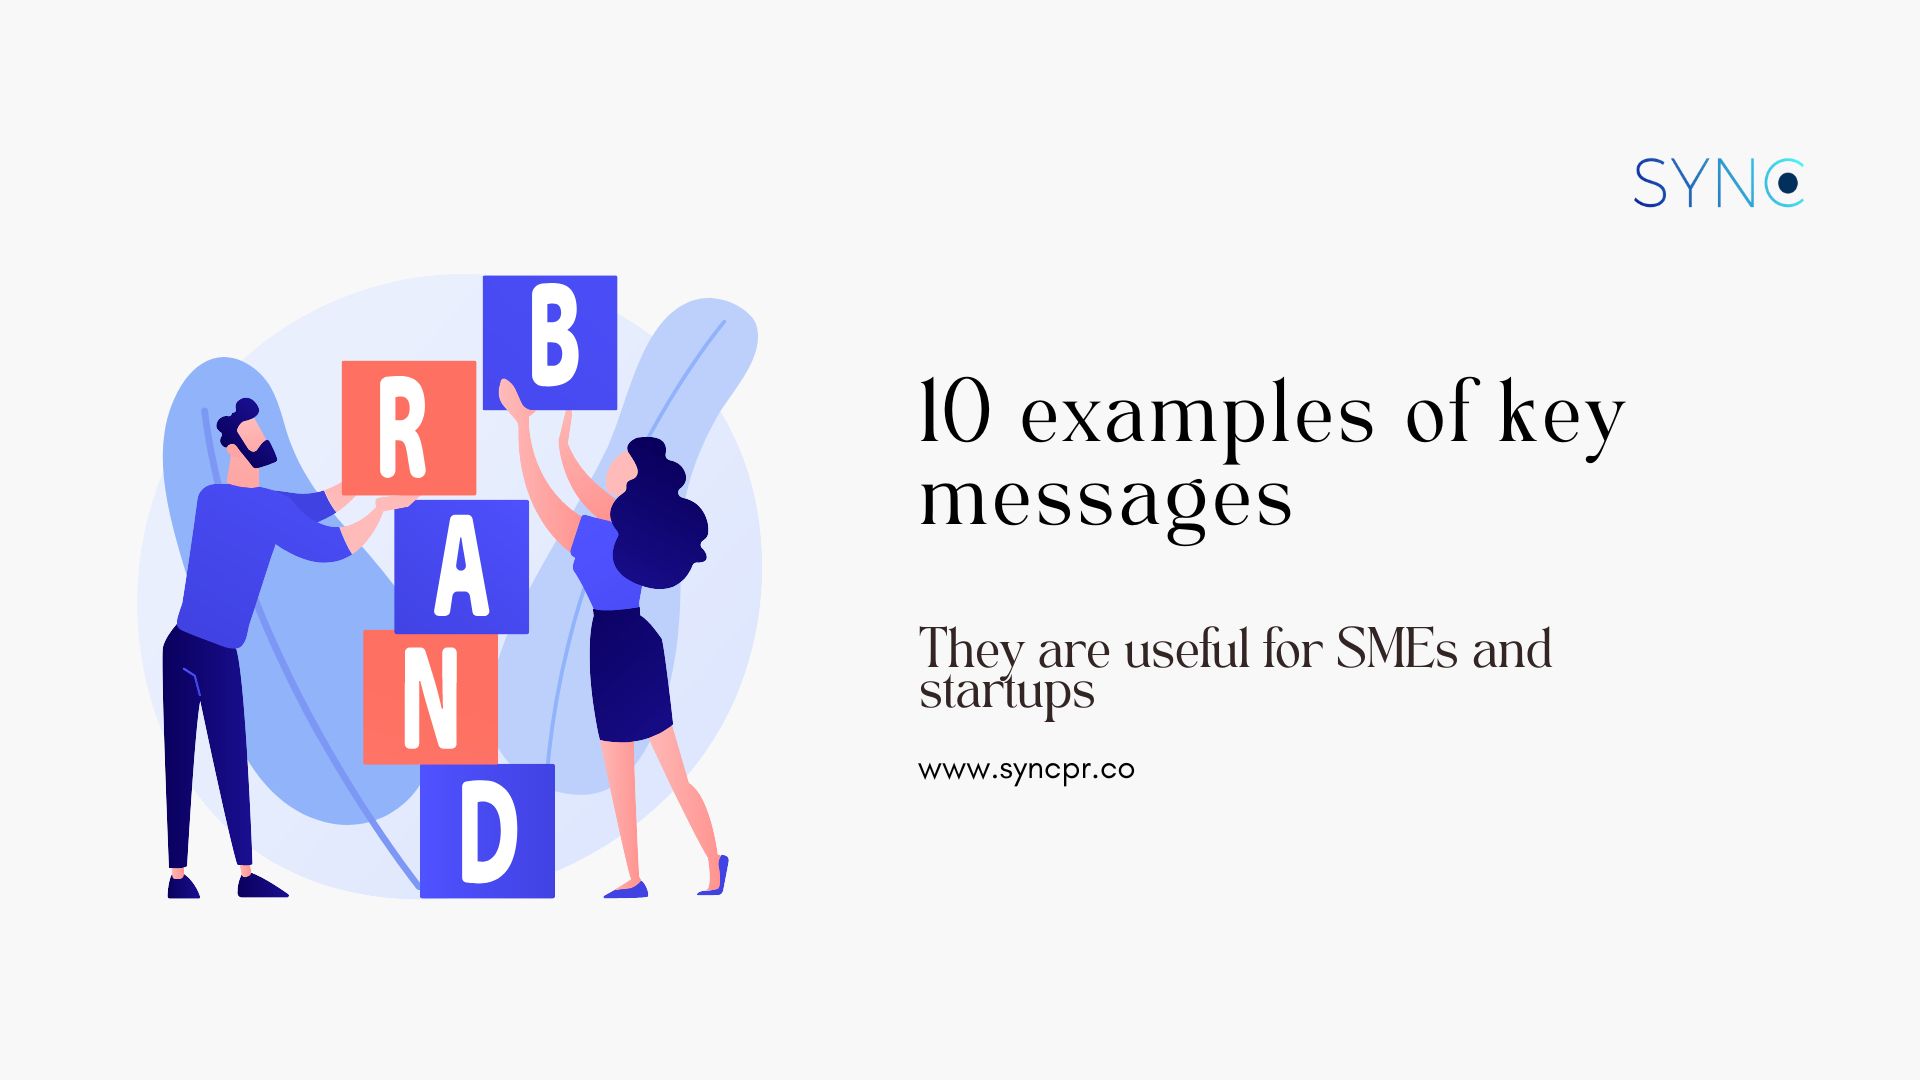 Here are examples of key messages useful for SMEs and startups